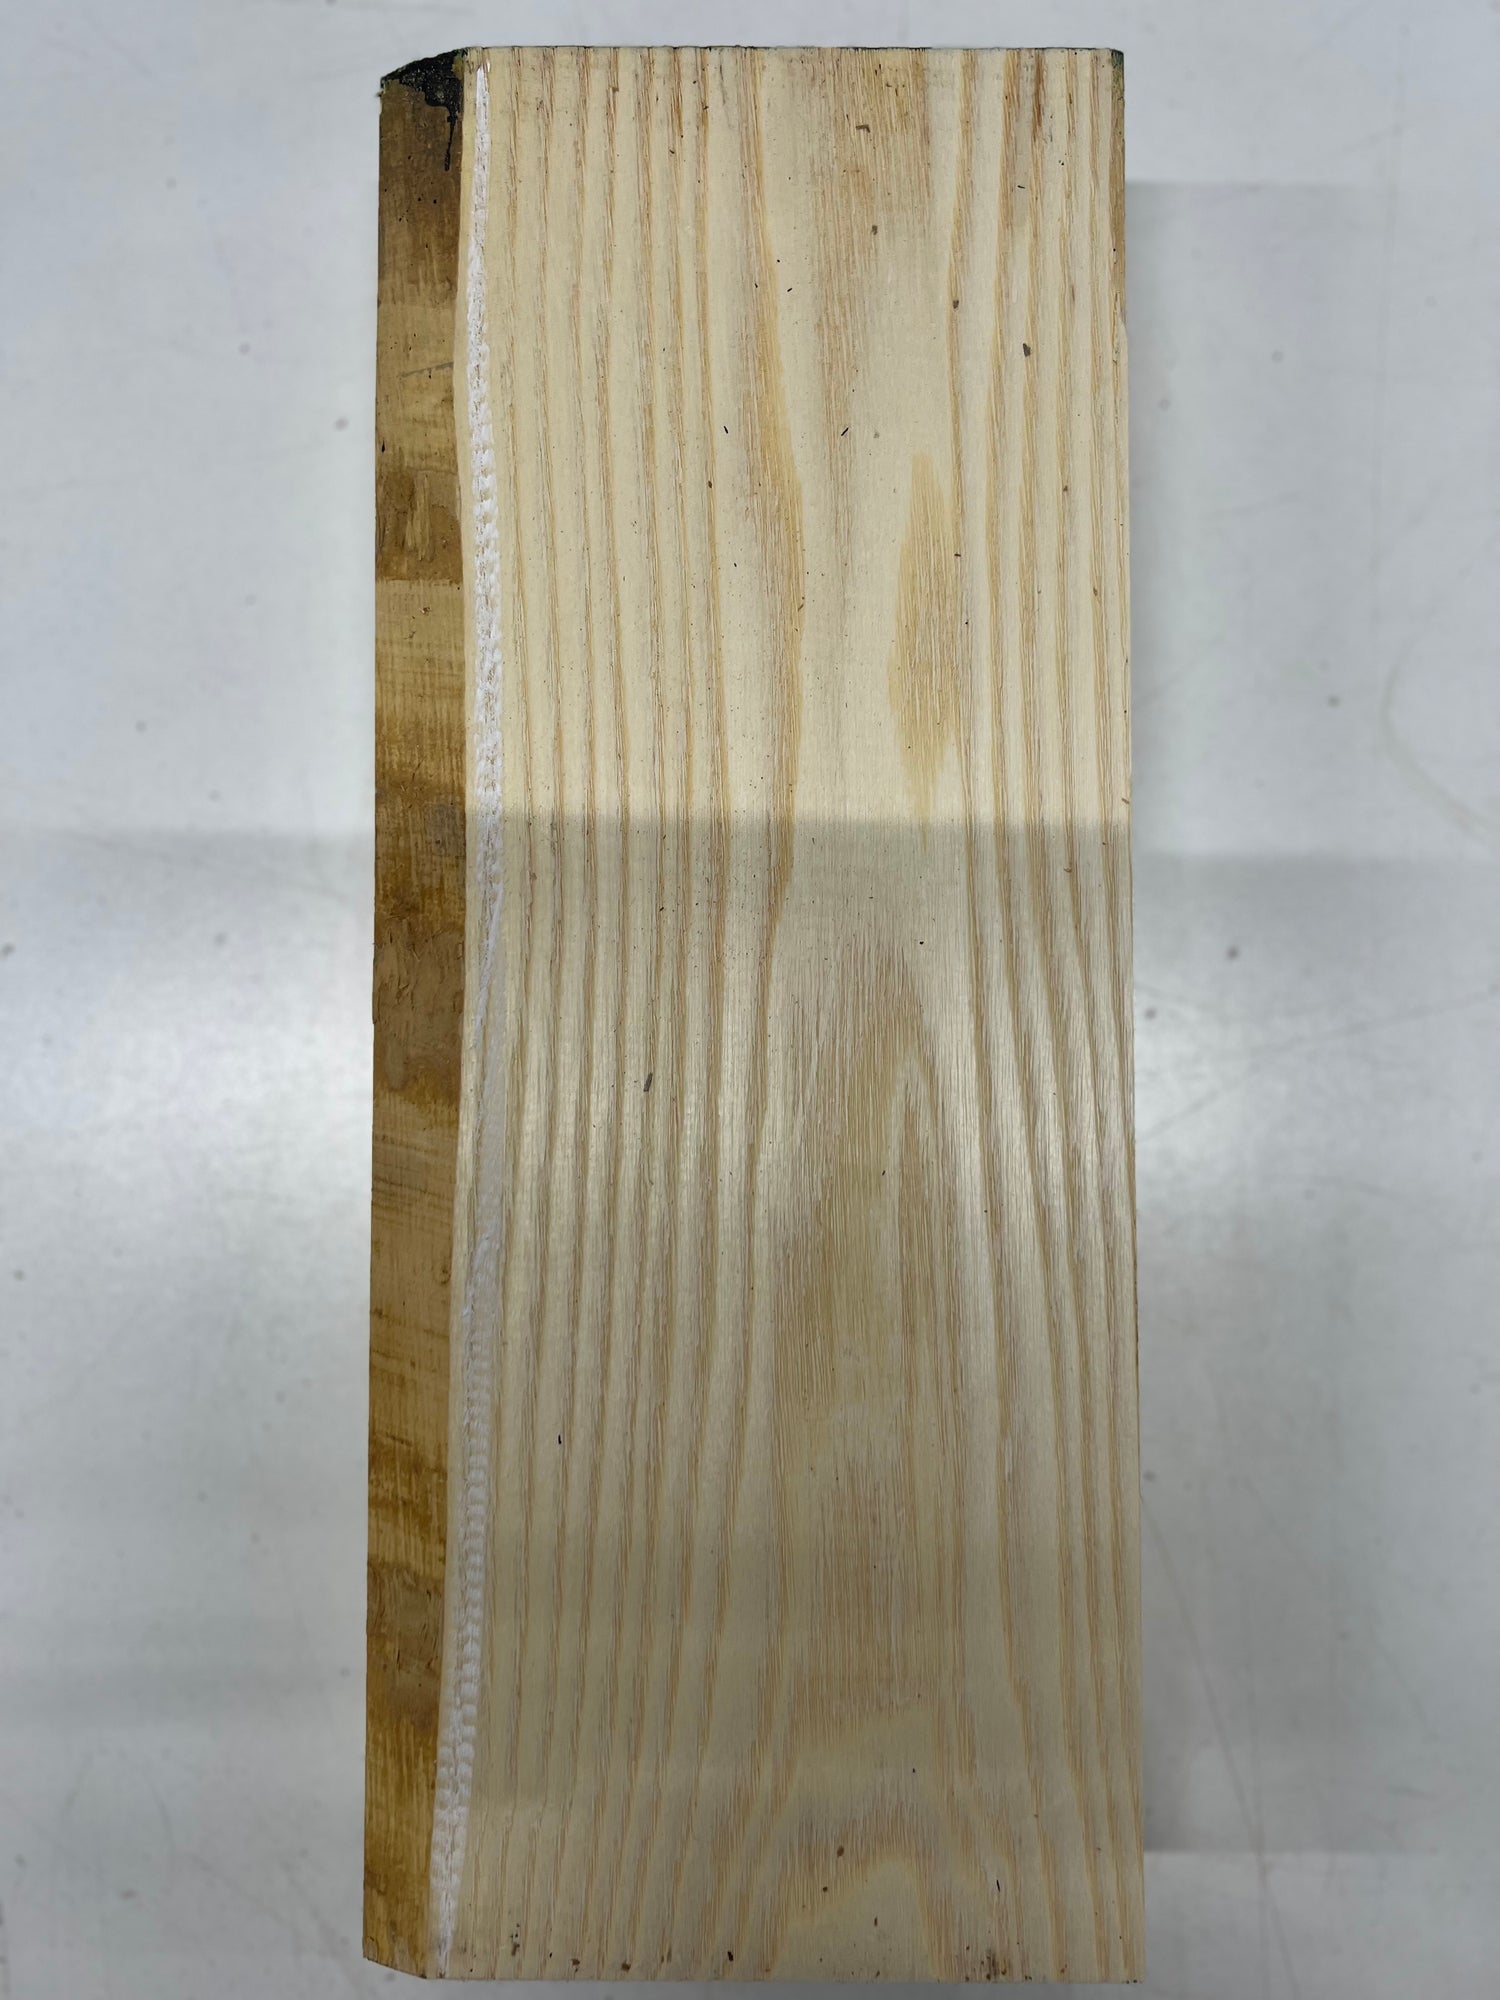 White Ash Lumber Board Wood Blank 13-1/2&quot;x 5-1/2&quot;x 2&quot; 